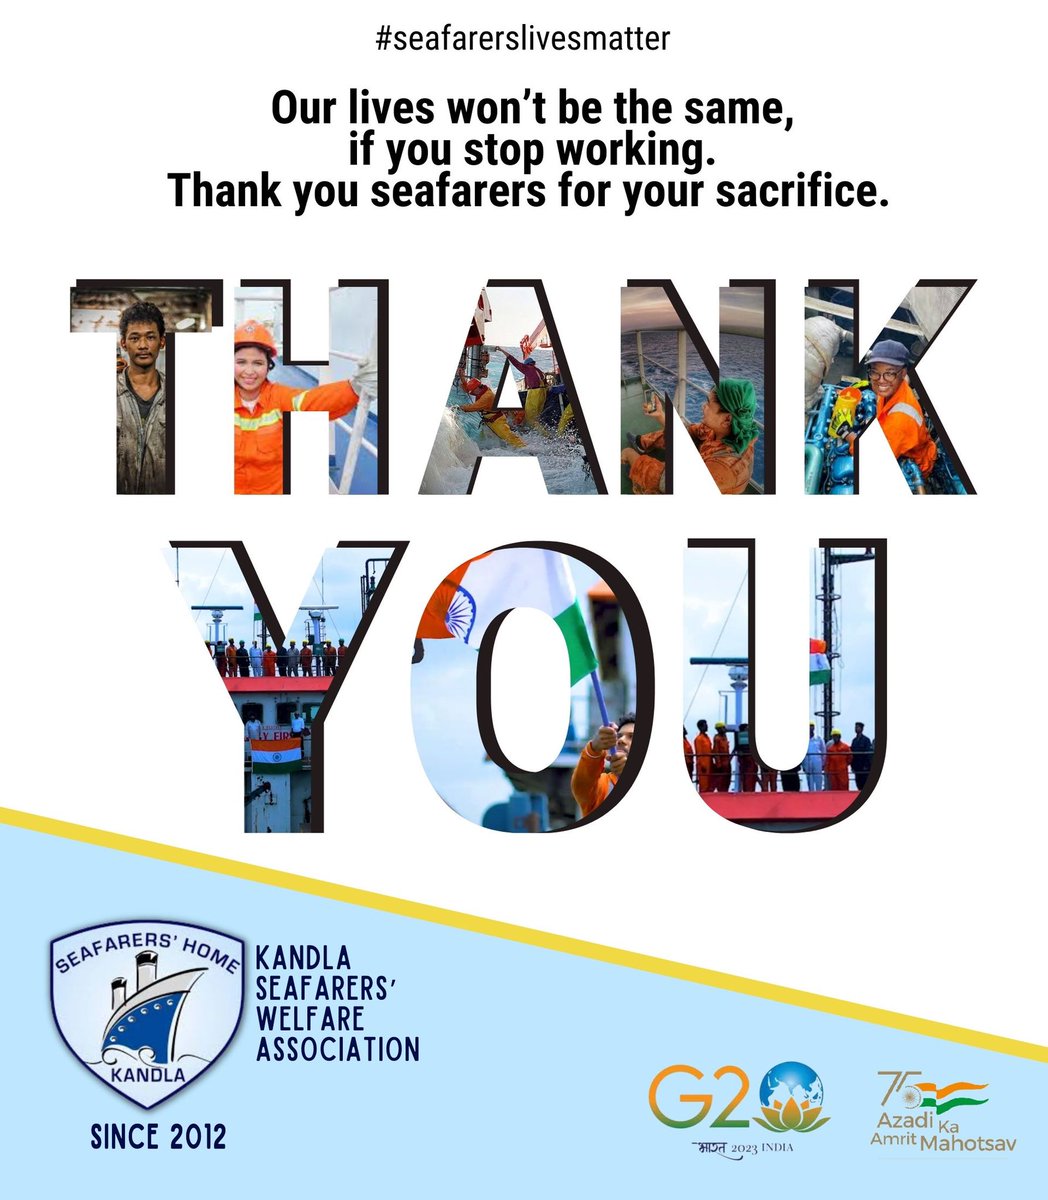 We would like to thank seafarer community without whom global trade is impossible. #seafarerslivesmatter #DPA